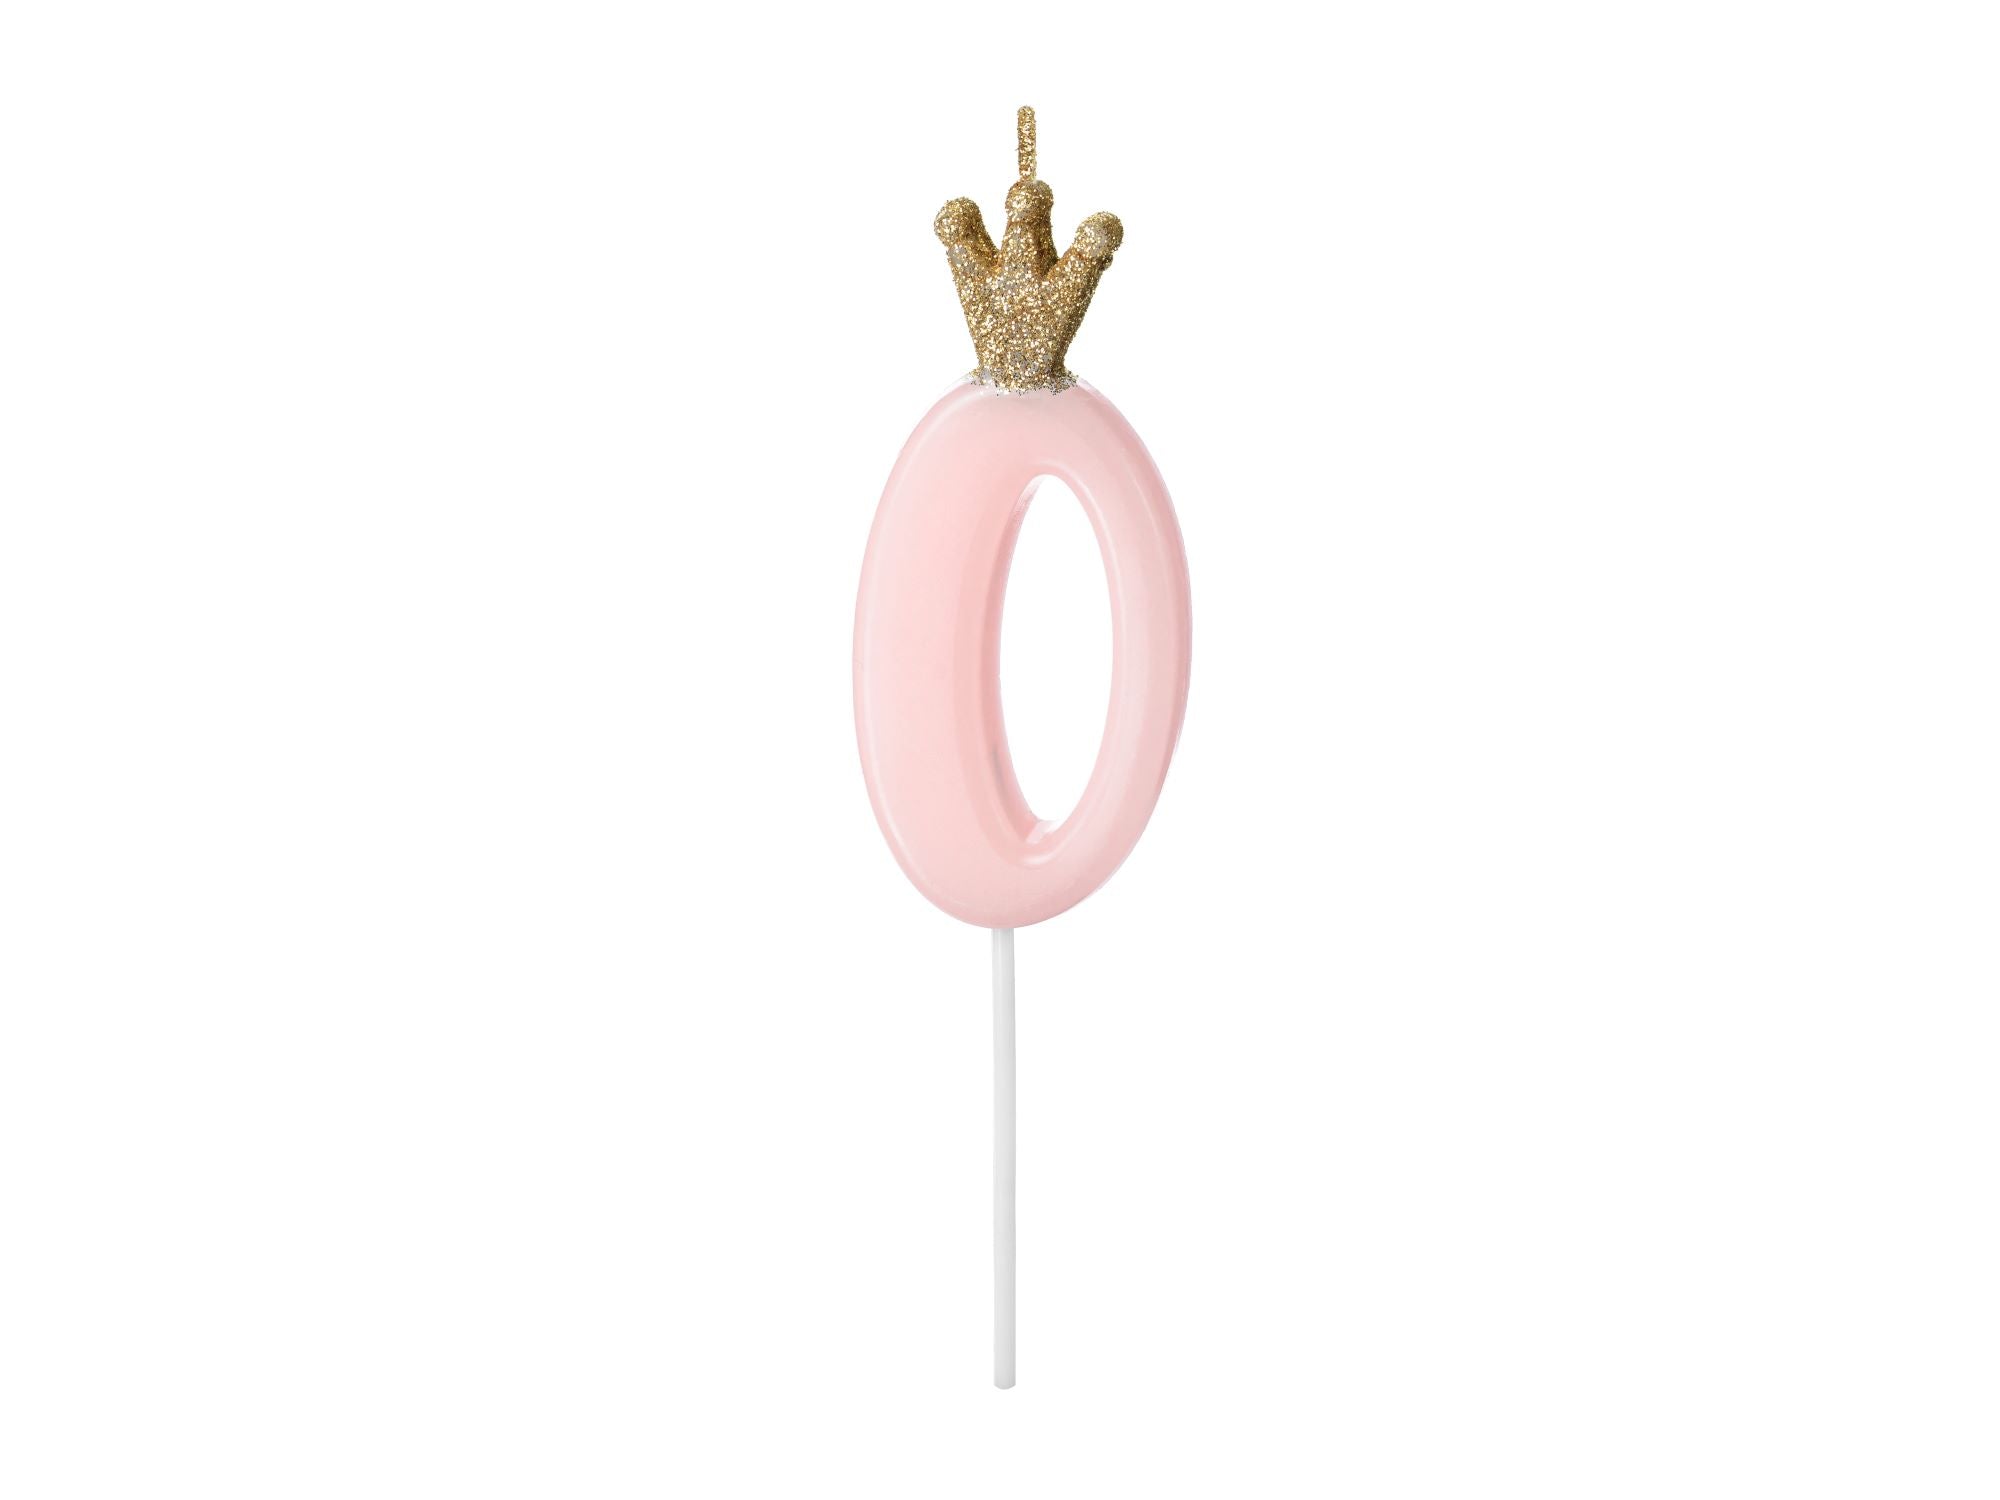 Pink Number 0 Birthday Candle with Crown